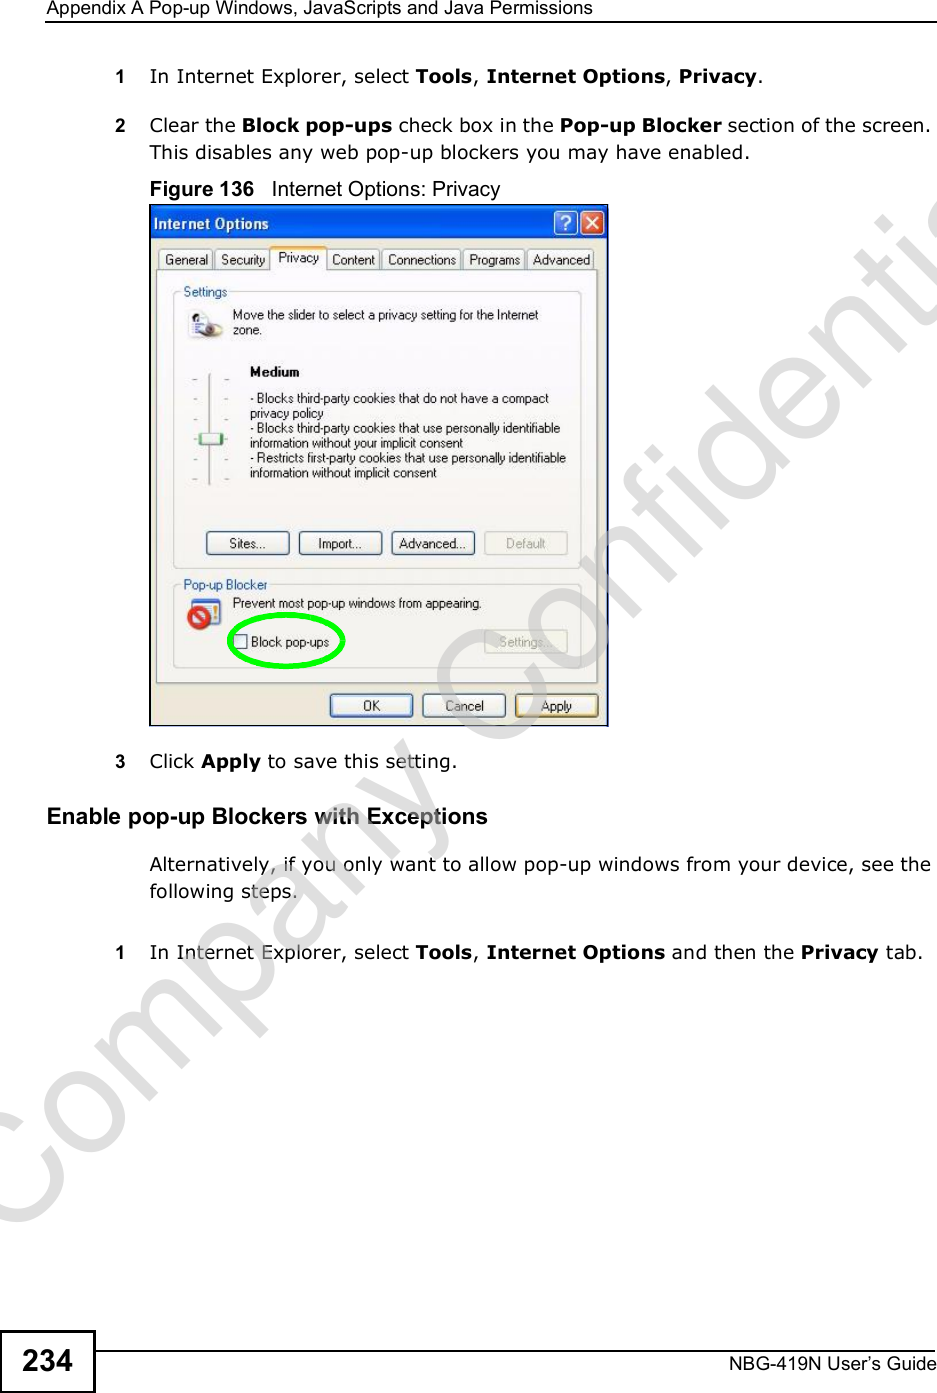 Appendix APop-up Windows, JavaScripts and Java PermissionsNBG-419N User s Guide2341In Internet Explorer, select Tools, Internet Options, Privacy.2Clear the Block pop-ups check box in the Pop-up Blocker section of the screen. This disables any web pop-up blockers you may have enabled. Figure 136   Internet Options: Privacy3Click Apply to save this setting.Enable pop-up Blockers with ExceptionsAlternatively, if you only want to allow pop-up windows from your device, see the following steps.1In Internet Explorer, select Tools, Internet Options and then the Privacy tab. Company Confidential